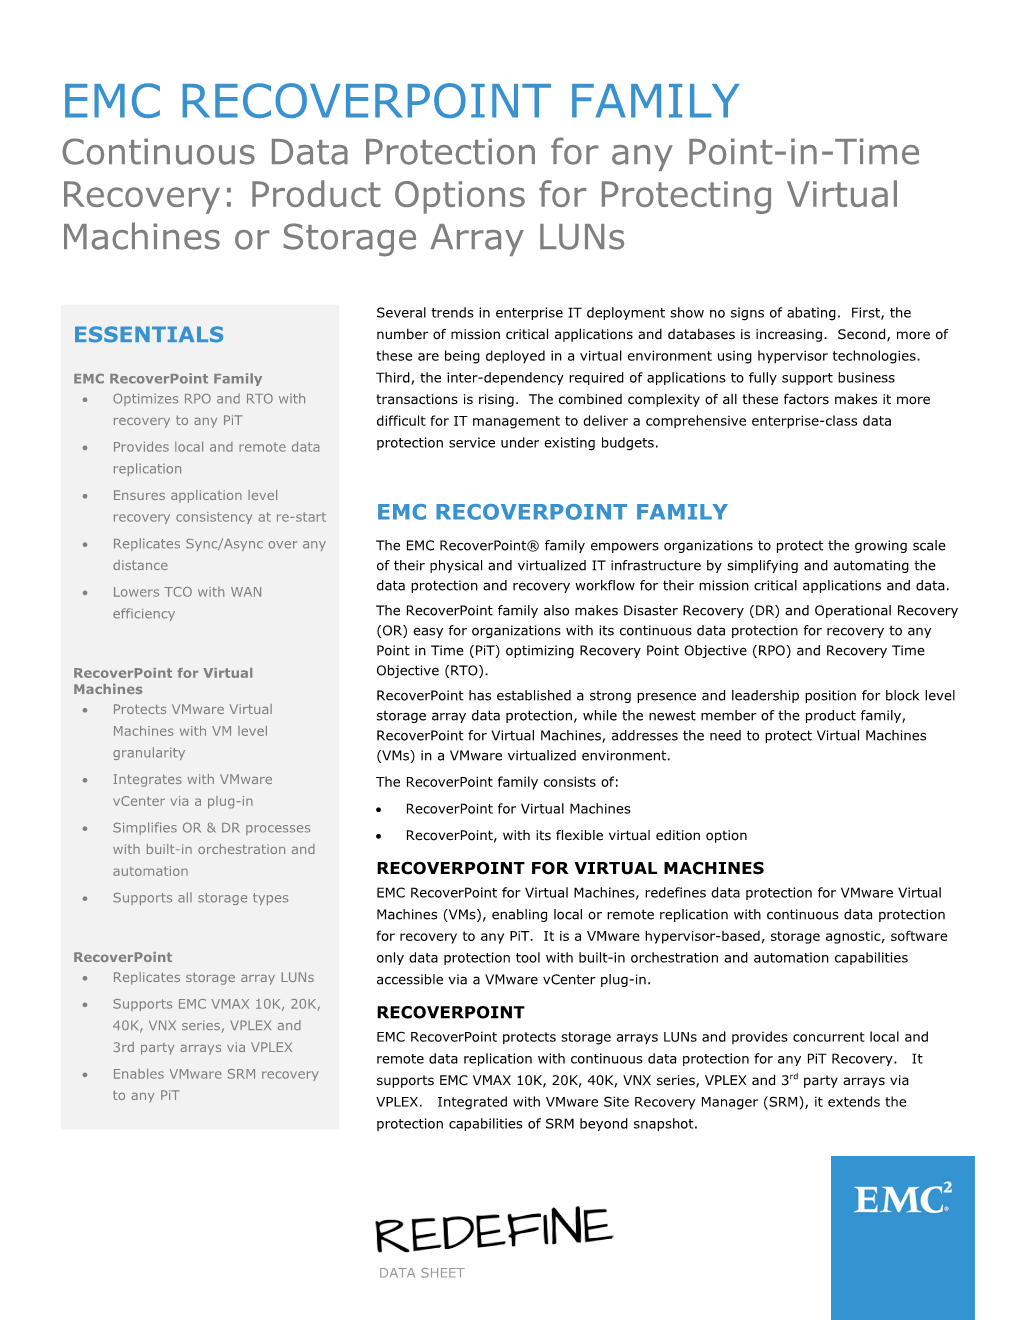 RECOVERPOINT FAMILY Continuous Data Protection for Any Point-In-Time Recovery: Product Options for Protecting Virtual Machines Or Storage Array Luns